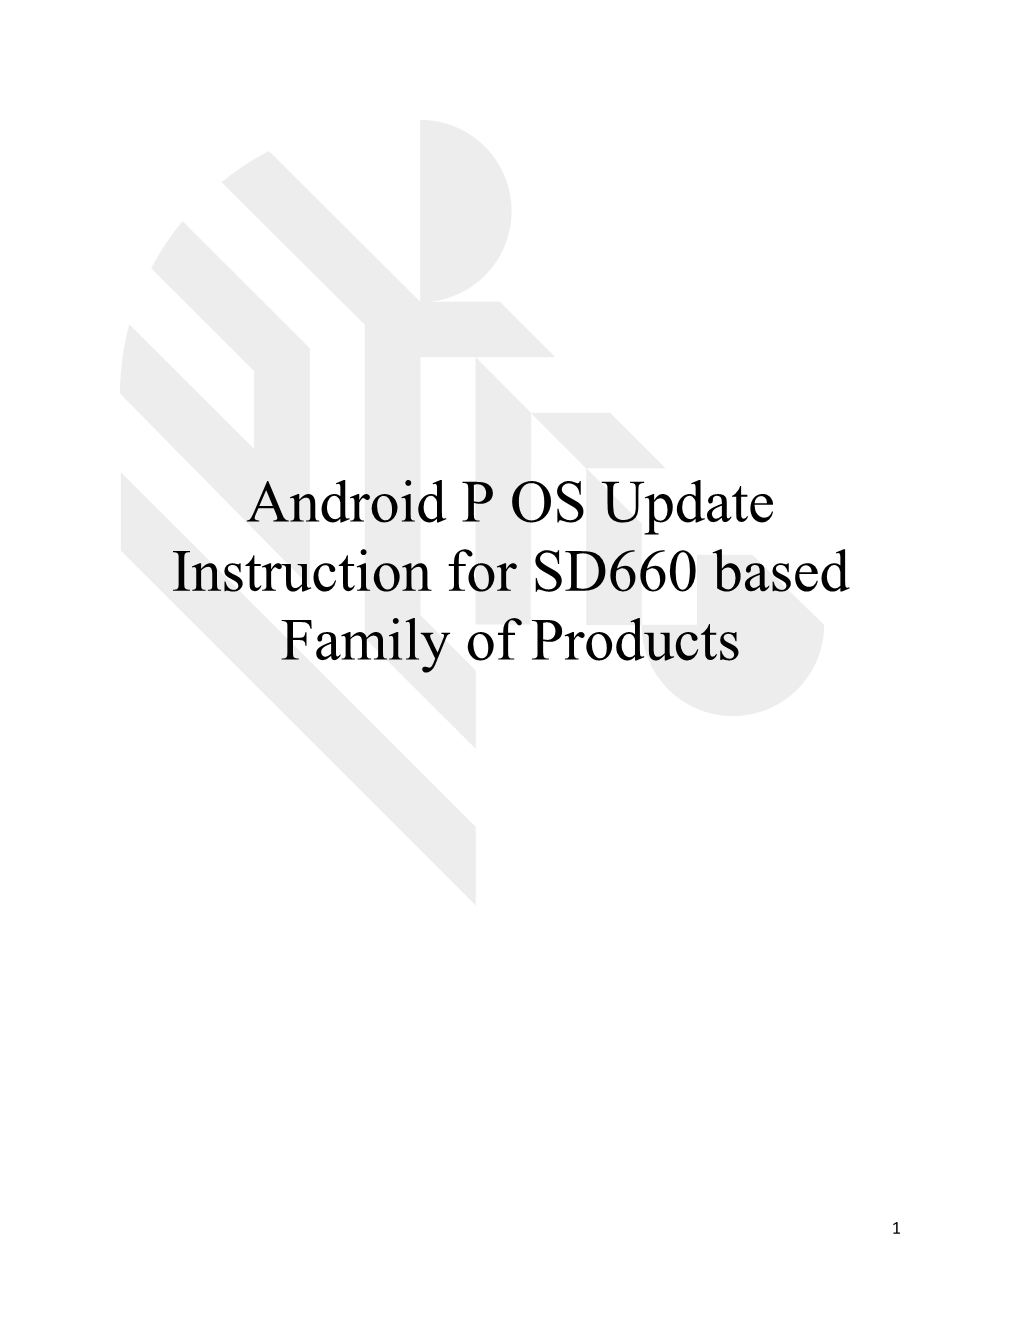 Android P OS Update Instruction for SD660 Based Family of Products